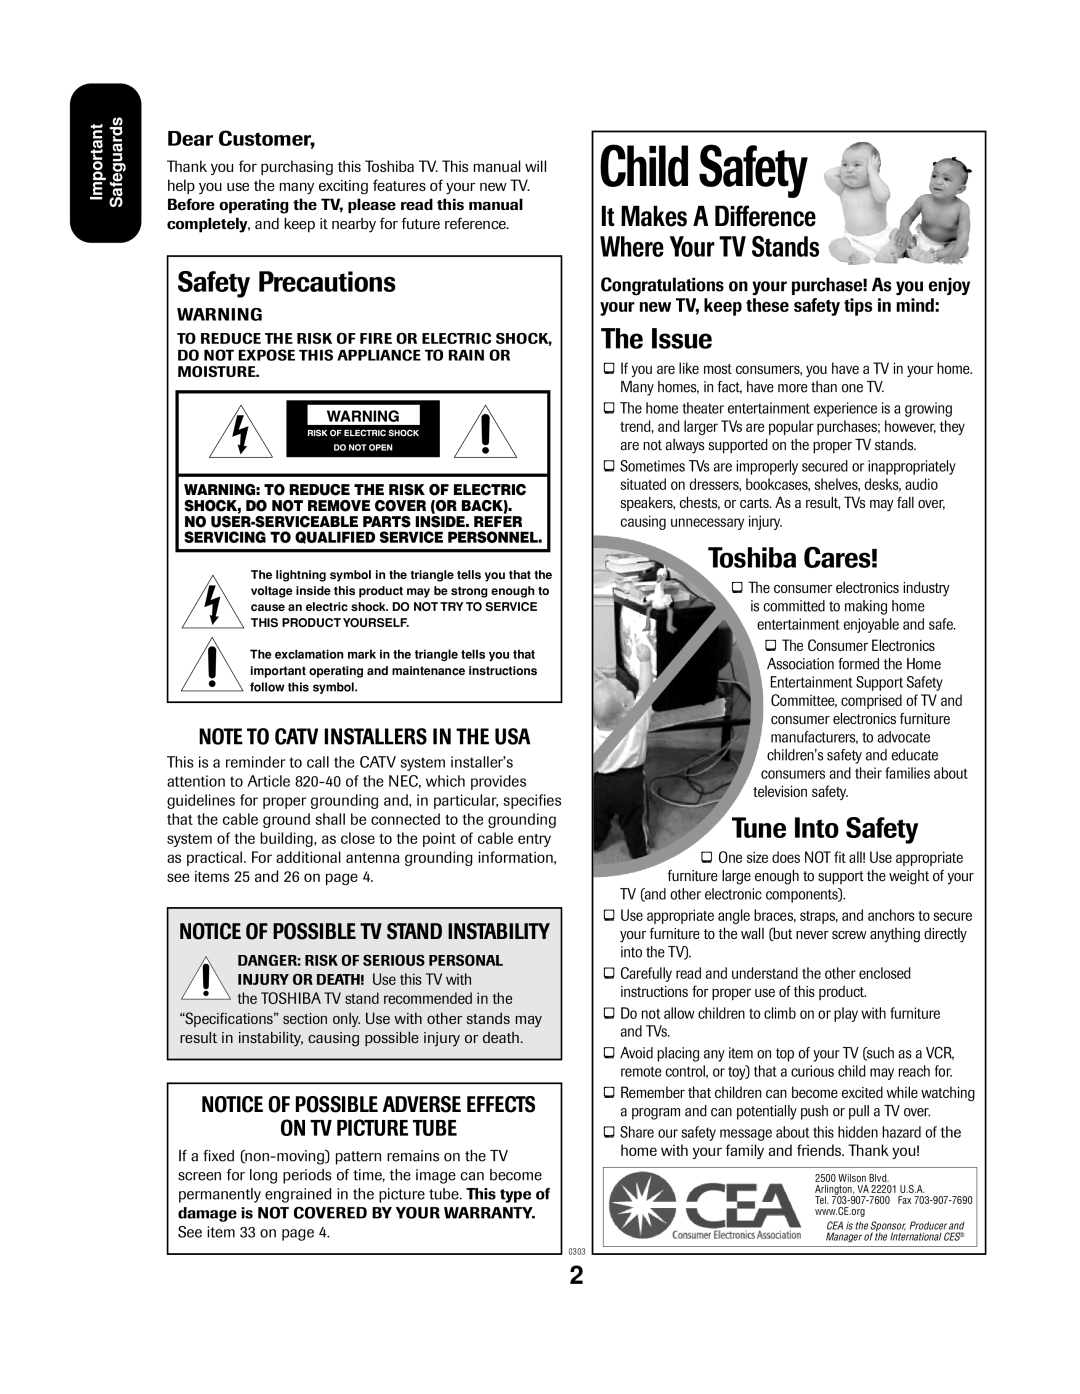 Toshiba 24AF43 Child Safety, Safety Precautions, It Makes A Difference Where Your TV Stands, The Issue, Toshiba Cares 